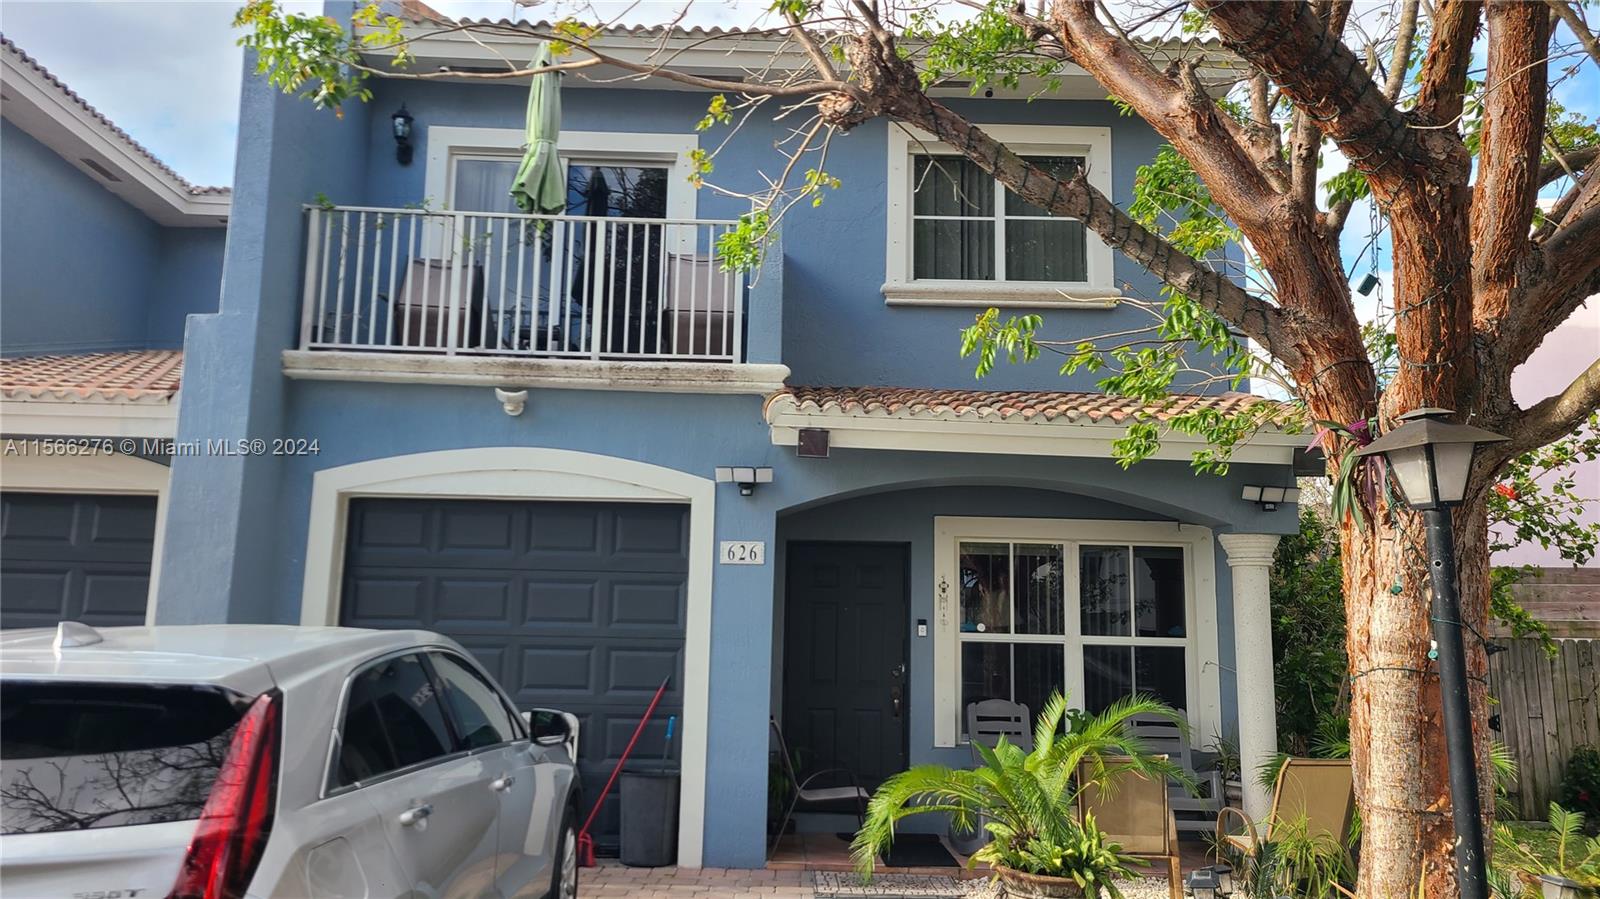 Rarely available 4-bedroom 2.5 bath unit at Key Winds. No HOA. 1 car garage, large fenced backyard. Perfect for investors or personal residence.  Easy access to the Turnpike, close to Air Force Base, Florida Keys Outlet, shopping, restaurants and more.